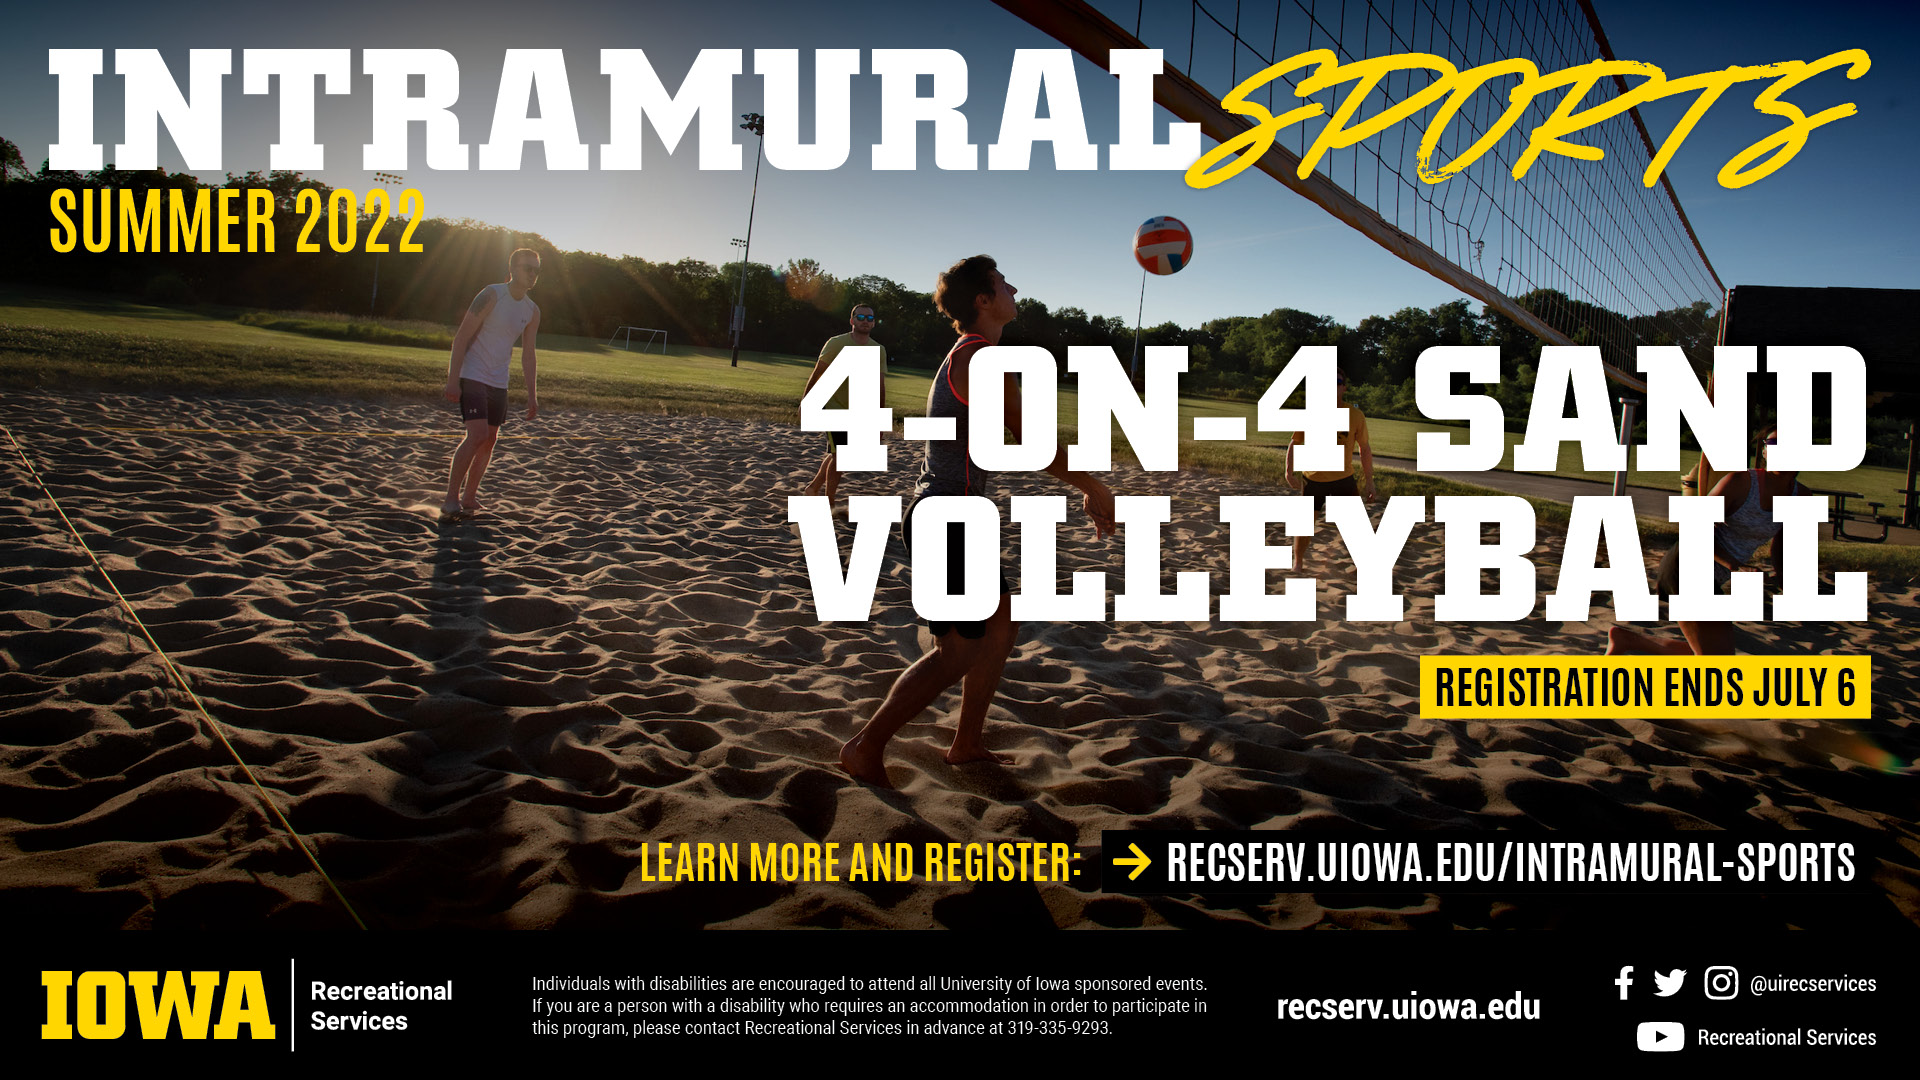 Summer 2022 Intramural Sports 4 on 4 Sand Volleyball. Registration ends July 6. Learn more and register: recserv.uiowa.edu/intramural-sports